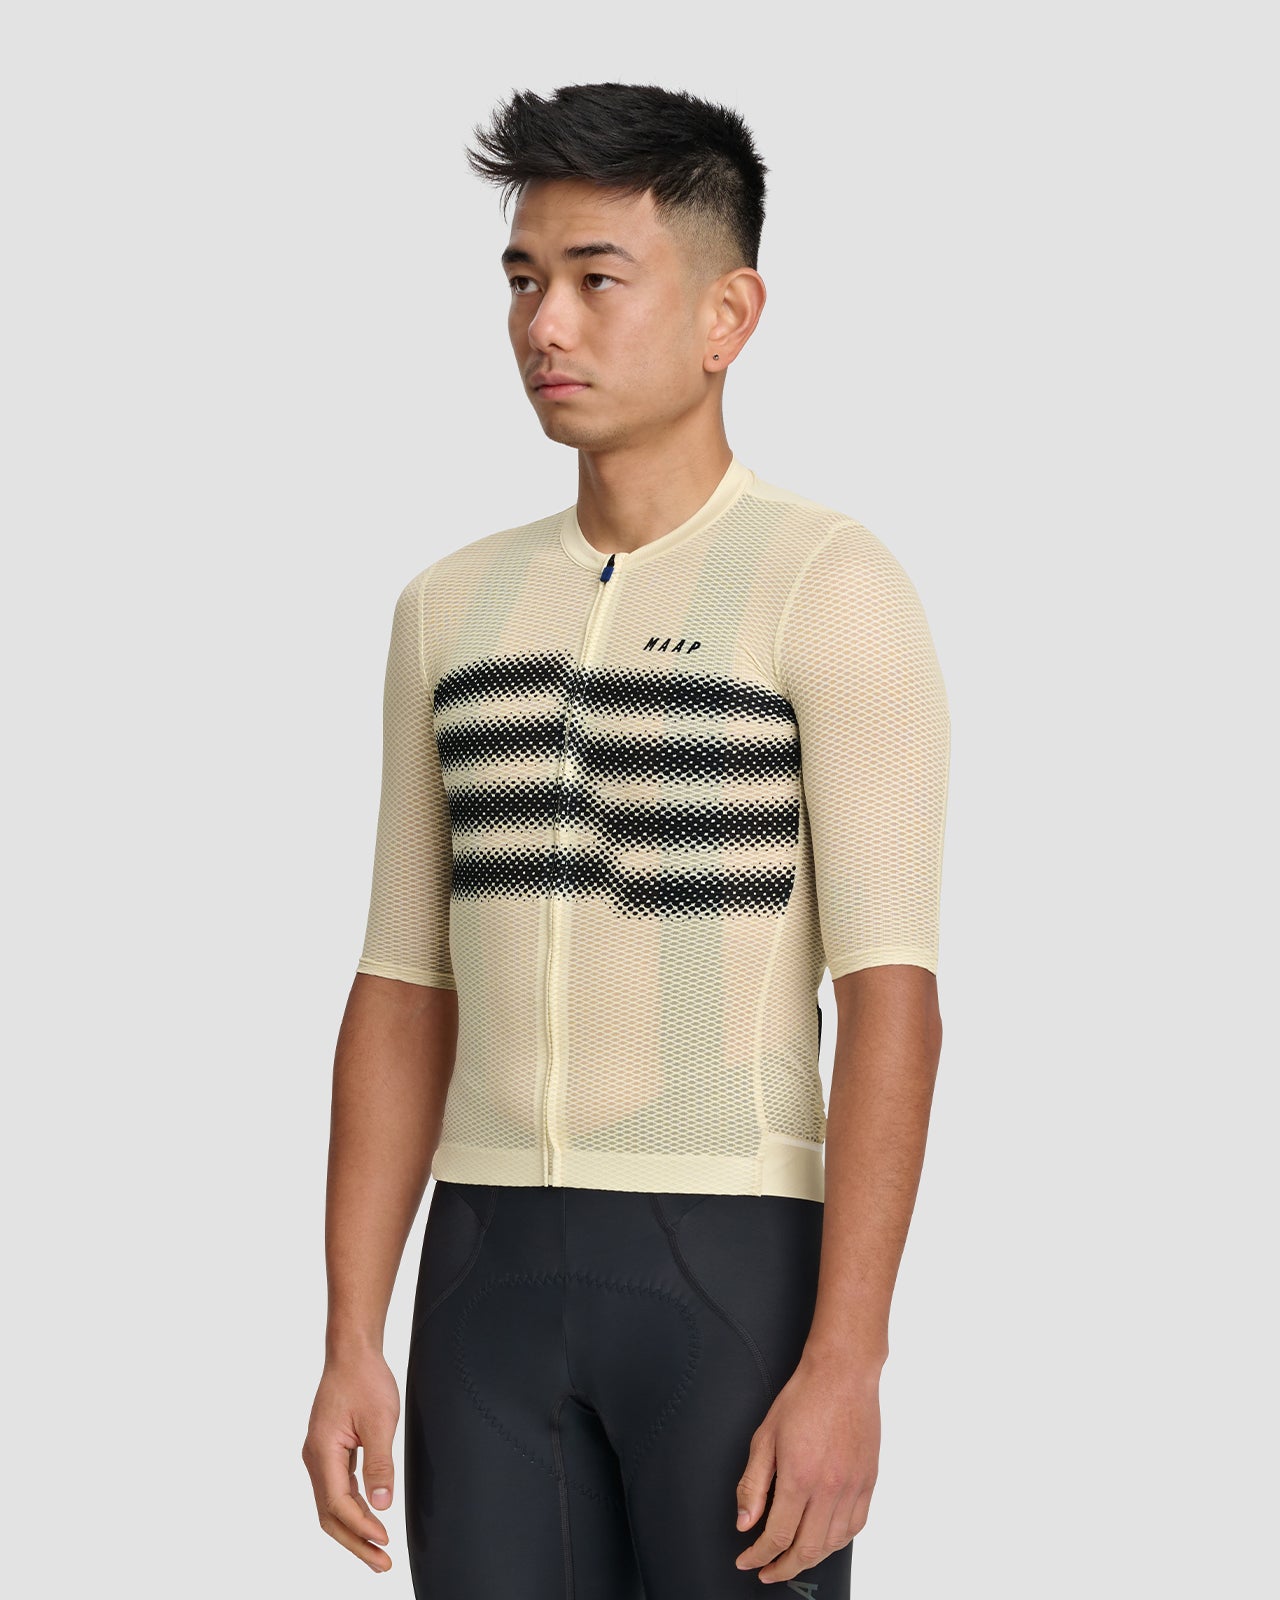 Blurred Out Ultralight Pro Jersey